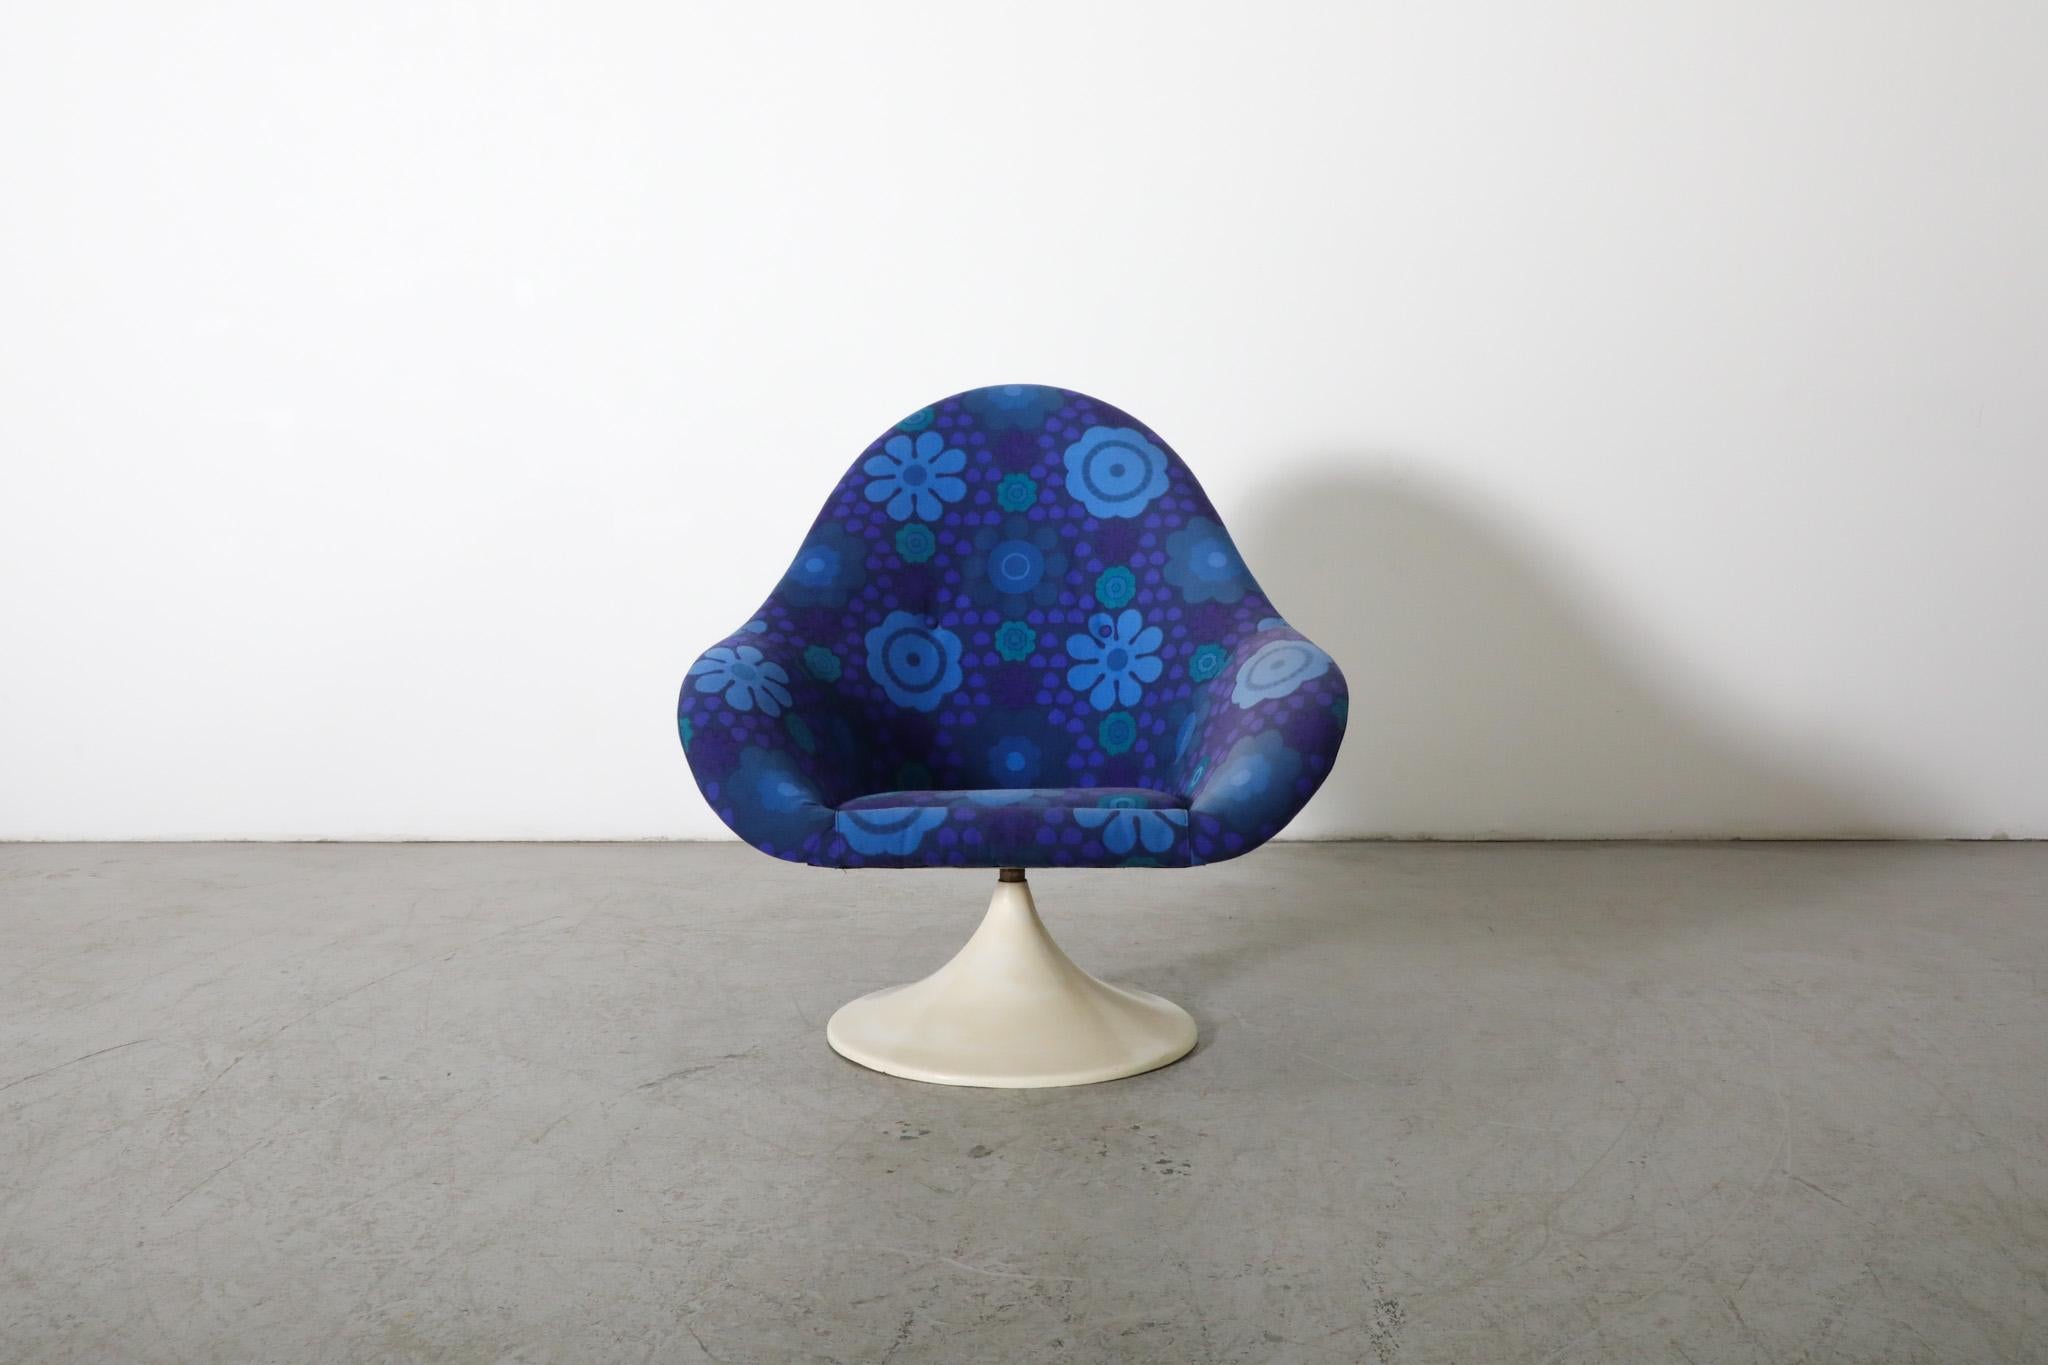 1970's blue tulip swivel chair by TopForm, inspired by Eero Saarinen and Pierre Paulin. This playful lounge chair features a single-form upholstered fiberglass armchair shell, adorned in a lovely vintage blue 1970s flower pattern and a white swivel